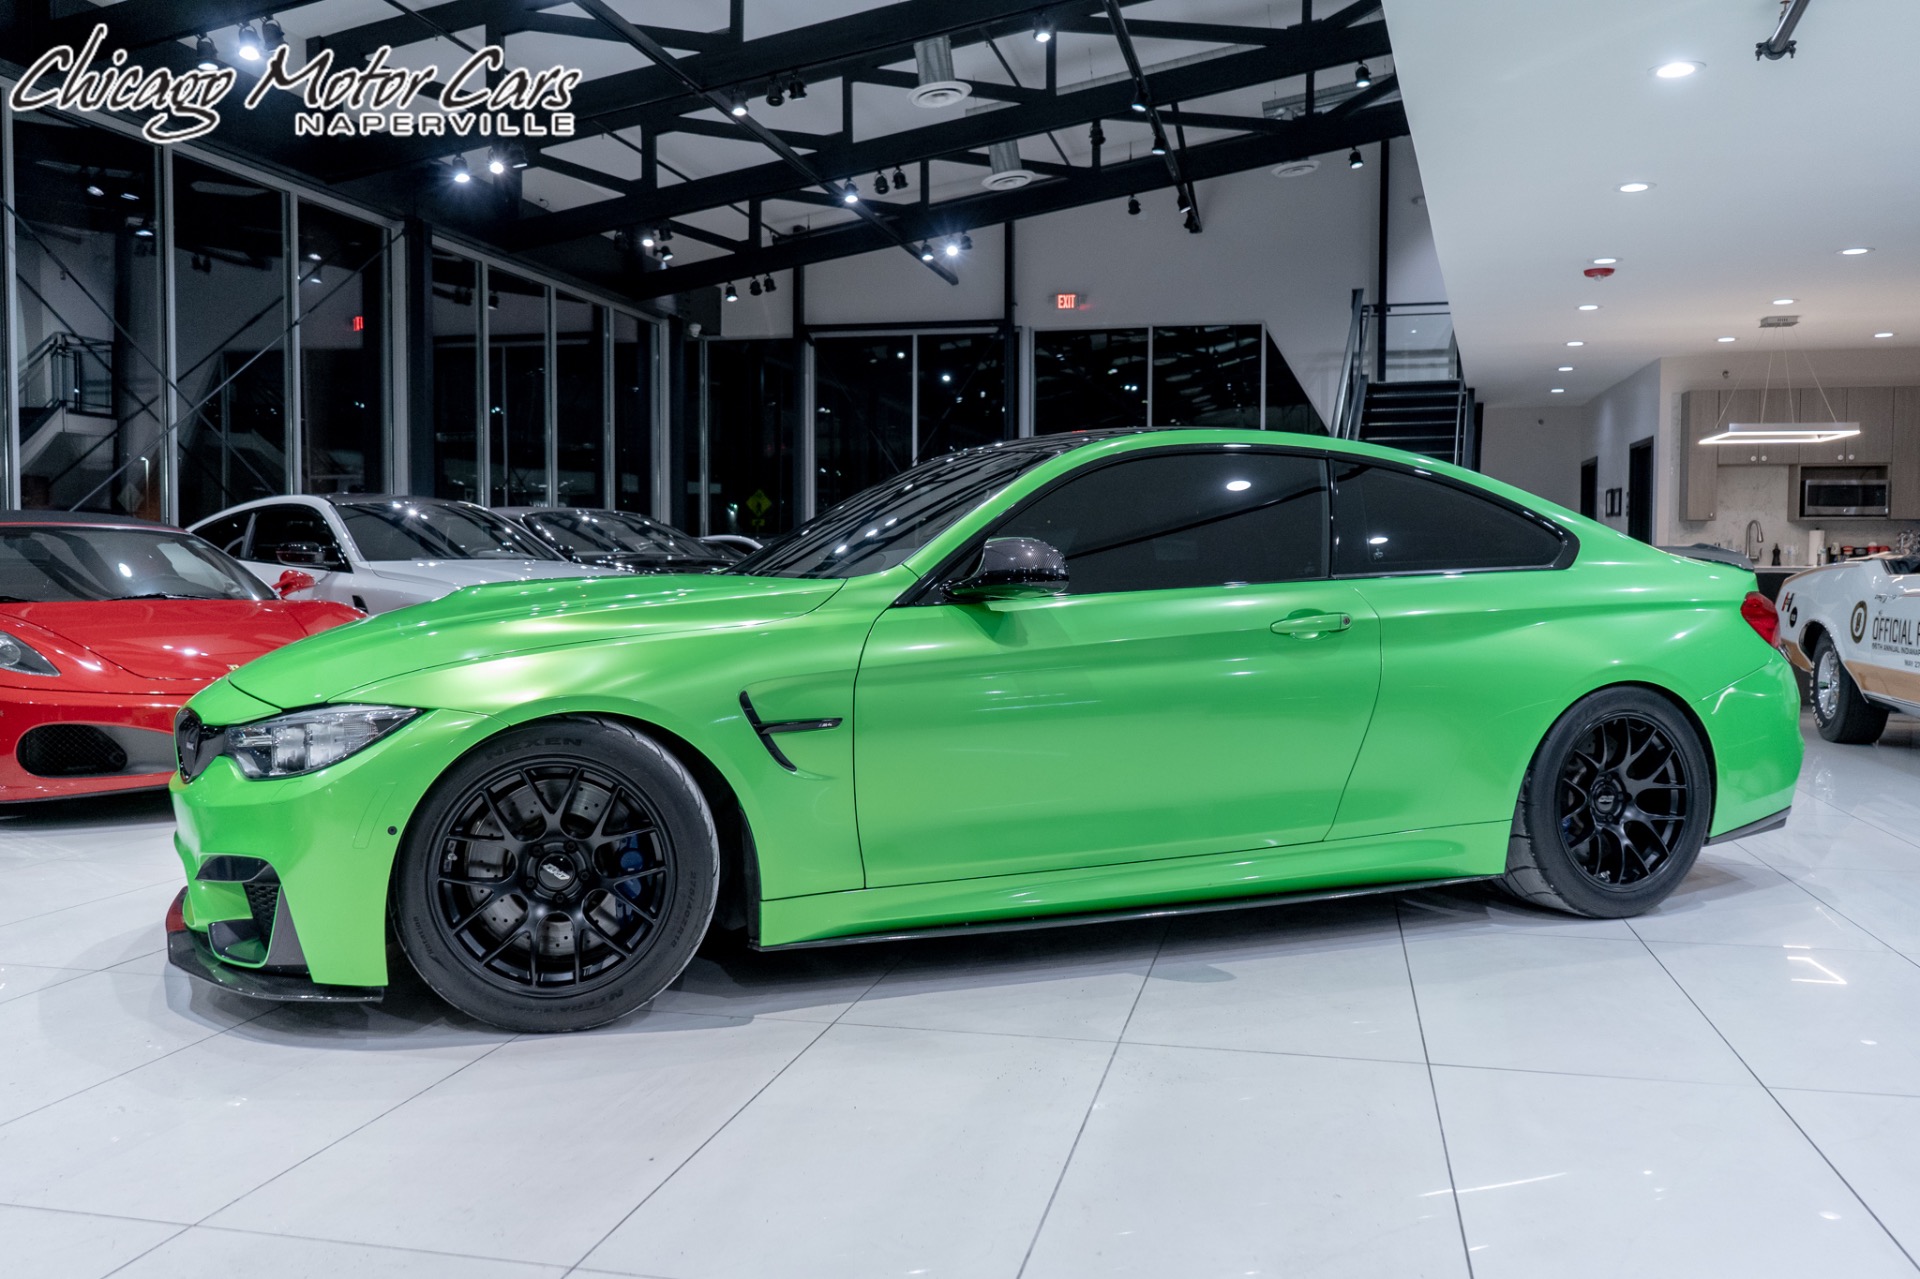 Used-2016-BMW-M4-Coupe-Exec-Pkg-Carbon-Roof-MHD-Stage-2-Tune-Full-Exhaust-Carbon-Aero